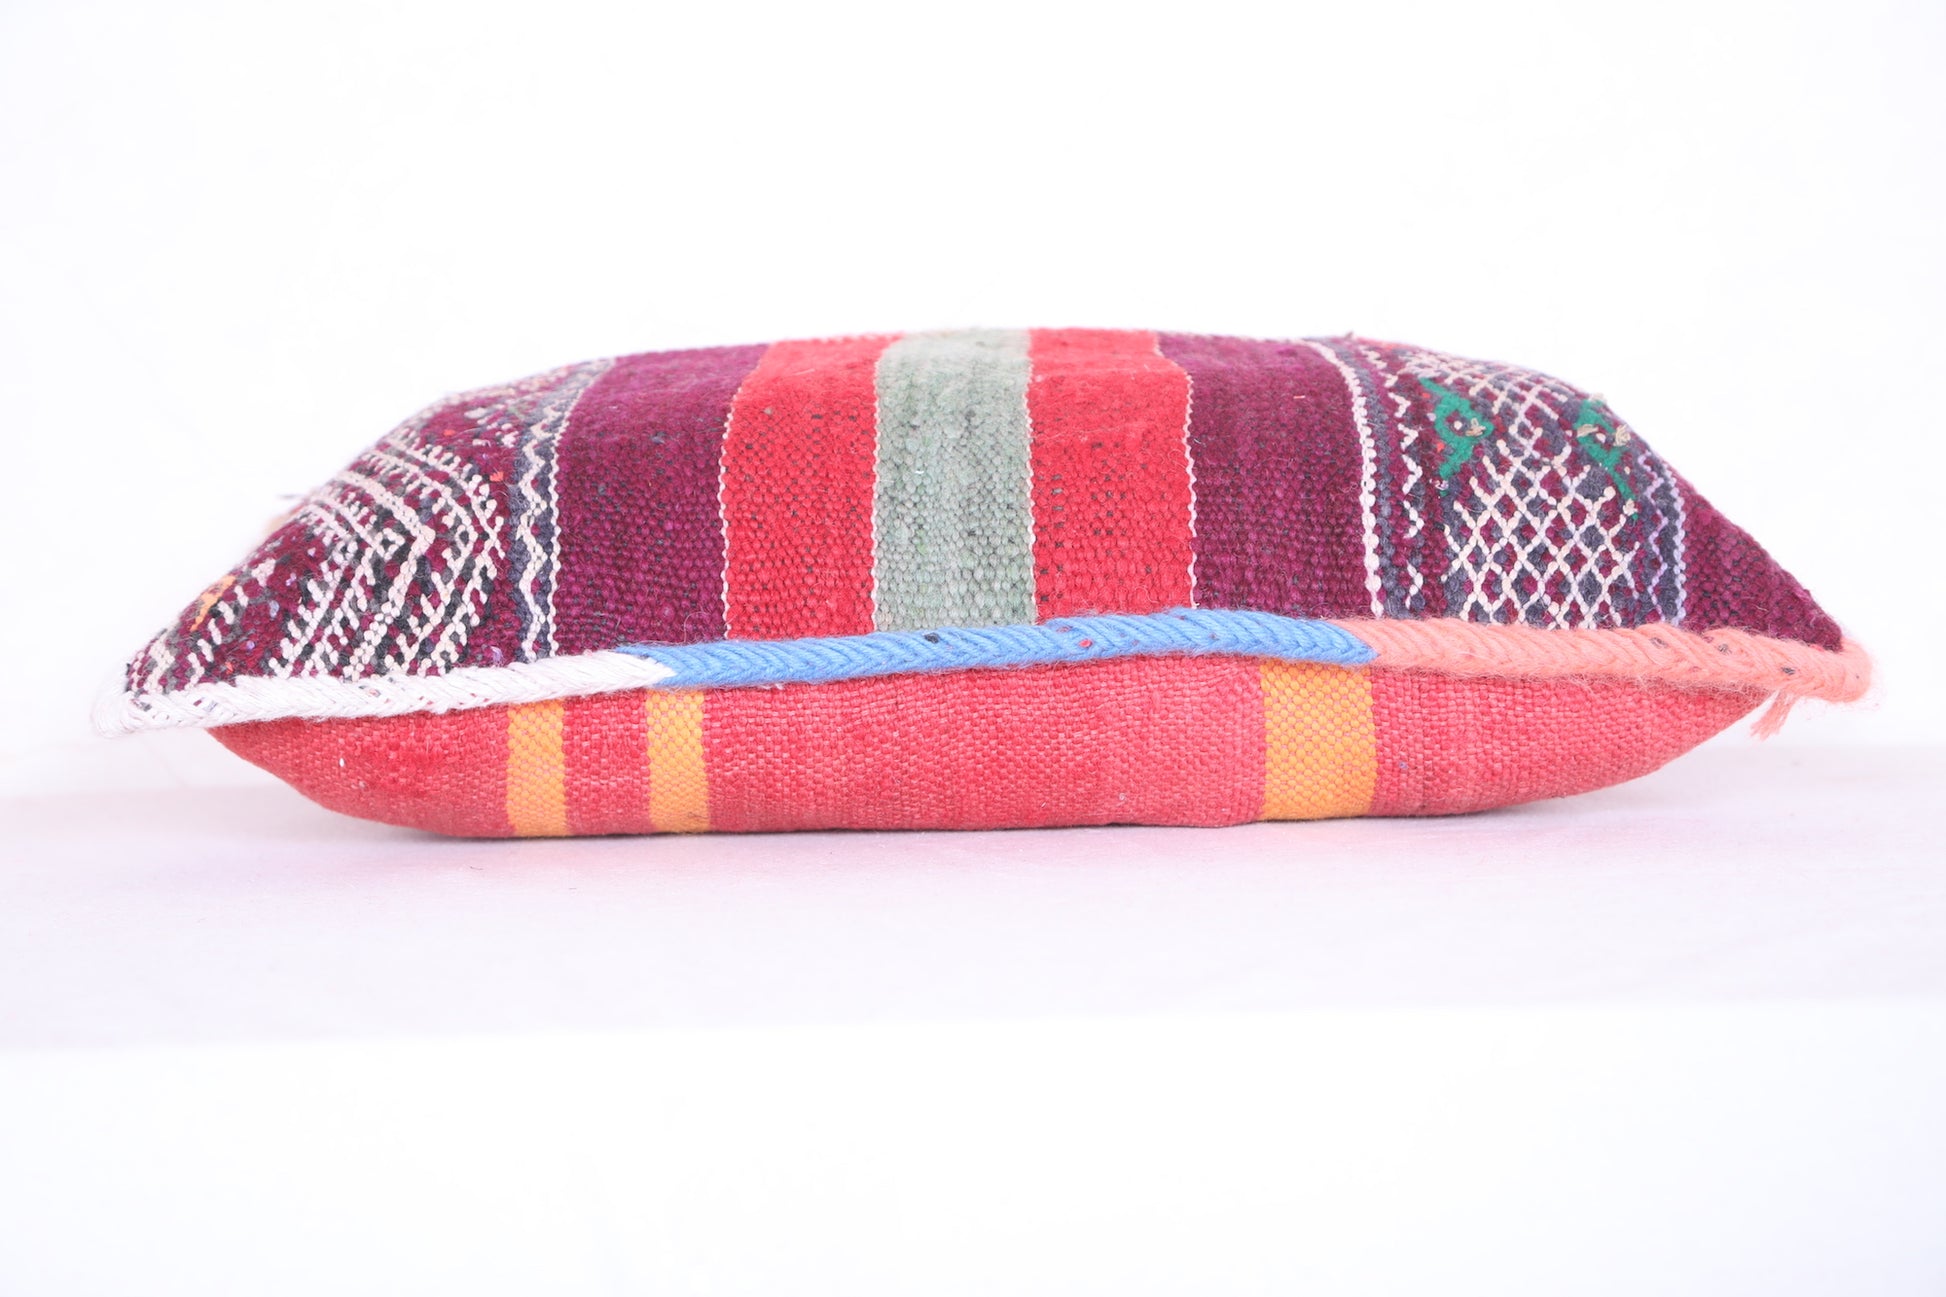 Moroccan handmade kilim pillow 14.9 INCHES X 20.8 INCHES